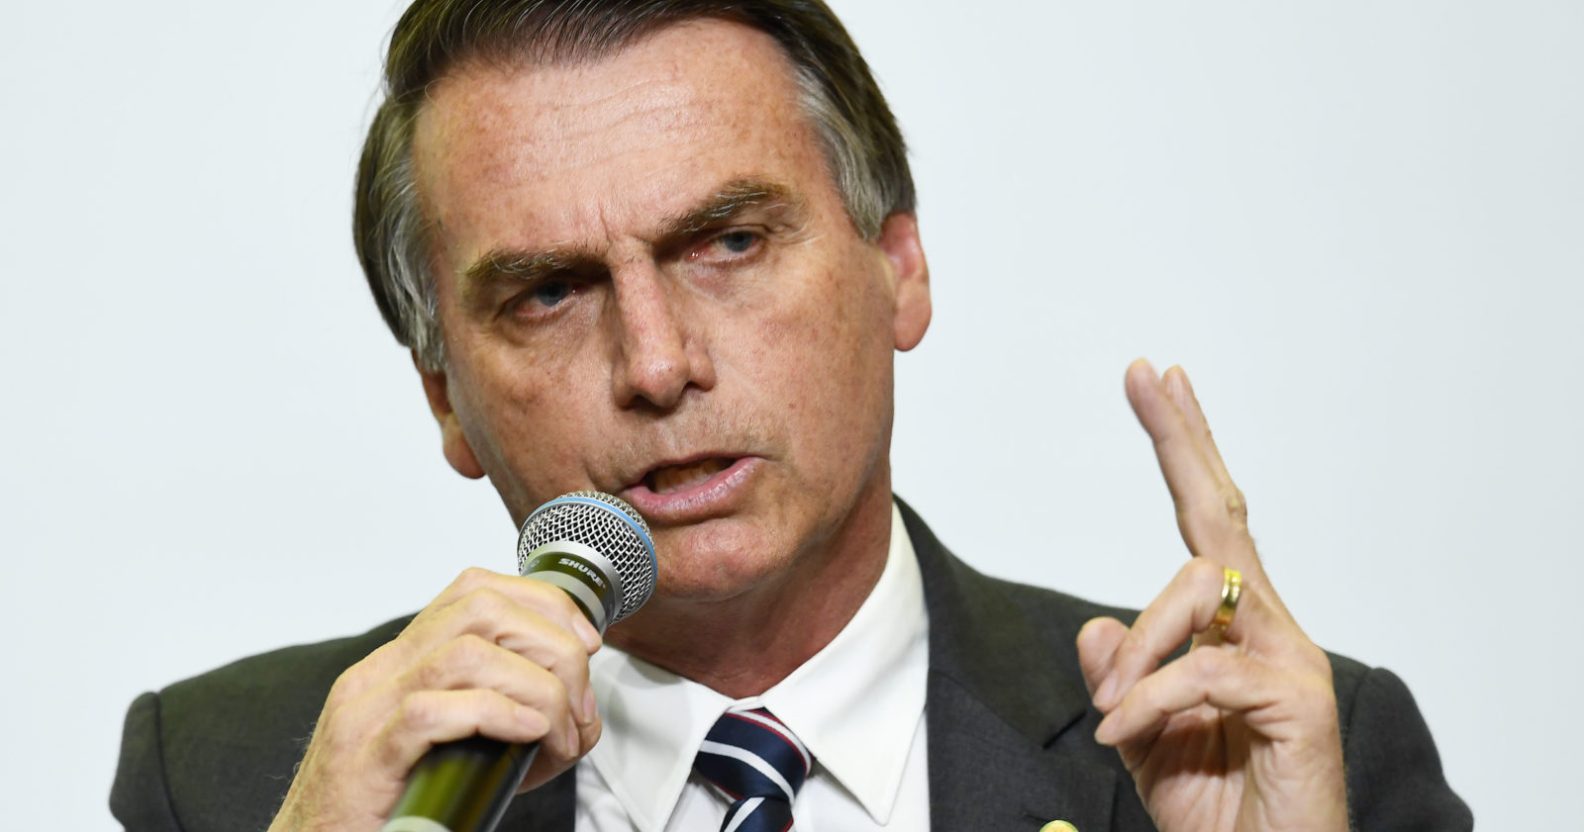 Jair Bolsonaro, presidential candidate for the Social Liberal Party, attends an interview for Correio Brazilianse newspaper in Brasilia on June 6, 2018. - Brazil holds general elections in October. (Photo by EVARISTO SA / AFP) LGBT+ rights (Photo credit should read EVARISTO SA/AFP/Getty Images)